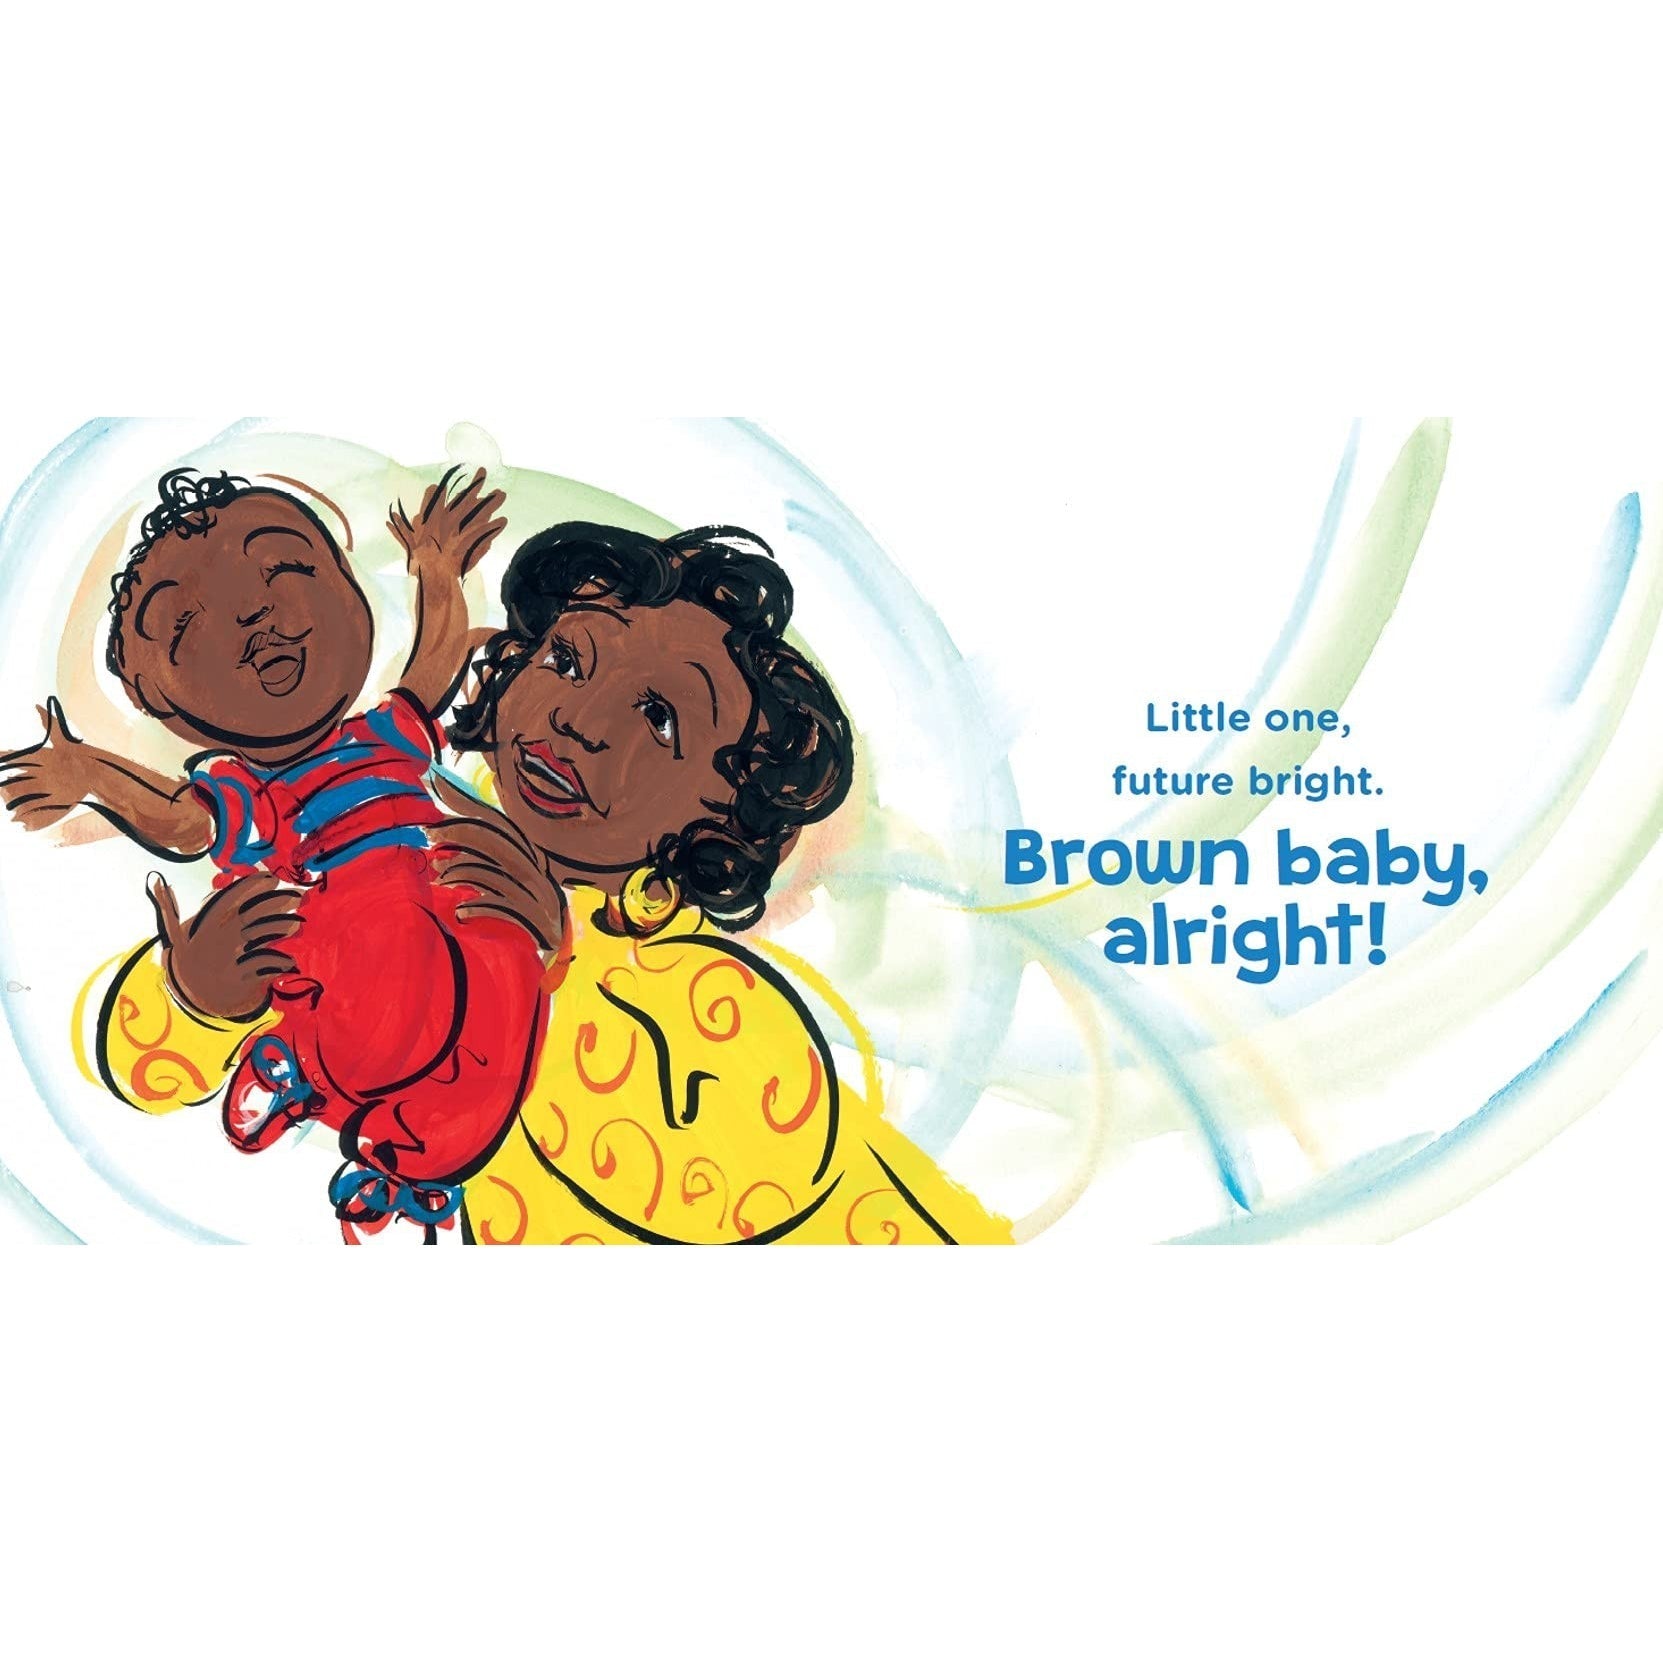 Bright Brown Baby: A Beautiful Treasury for Black and Brown Babies: A Treasury - Andrea Davis Pinkney